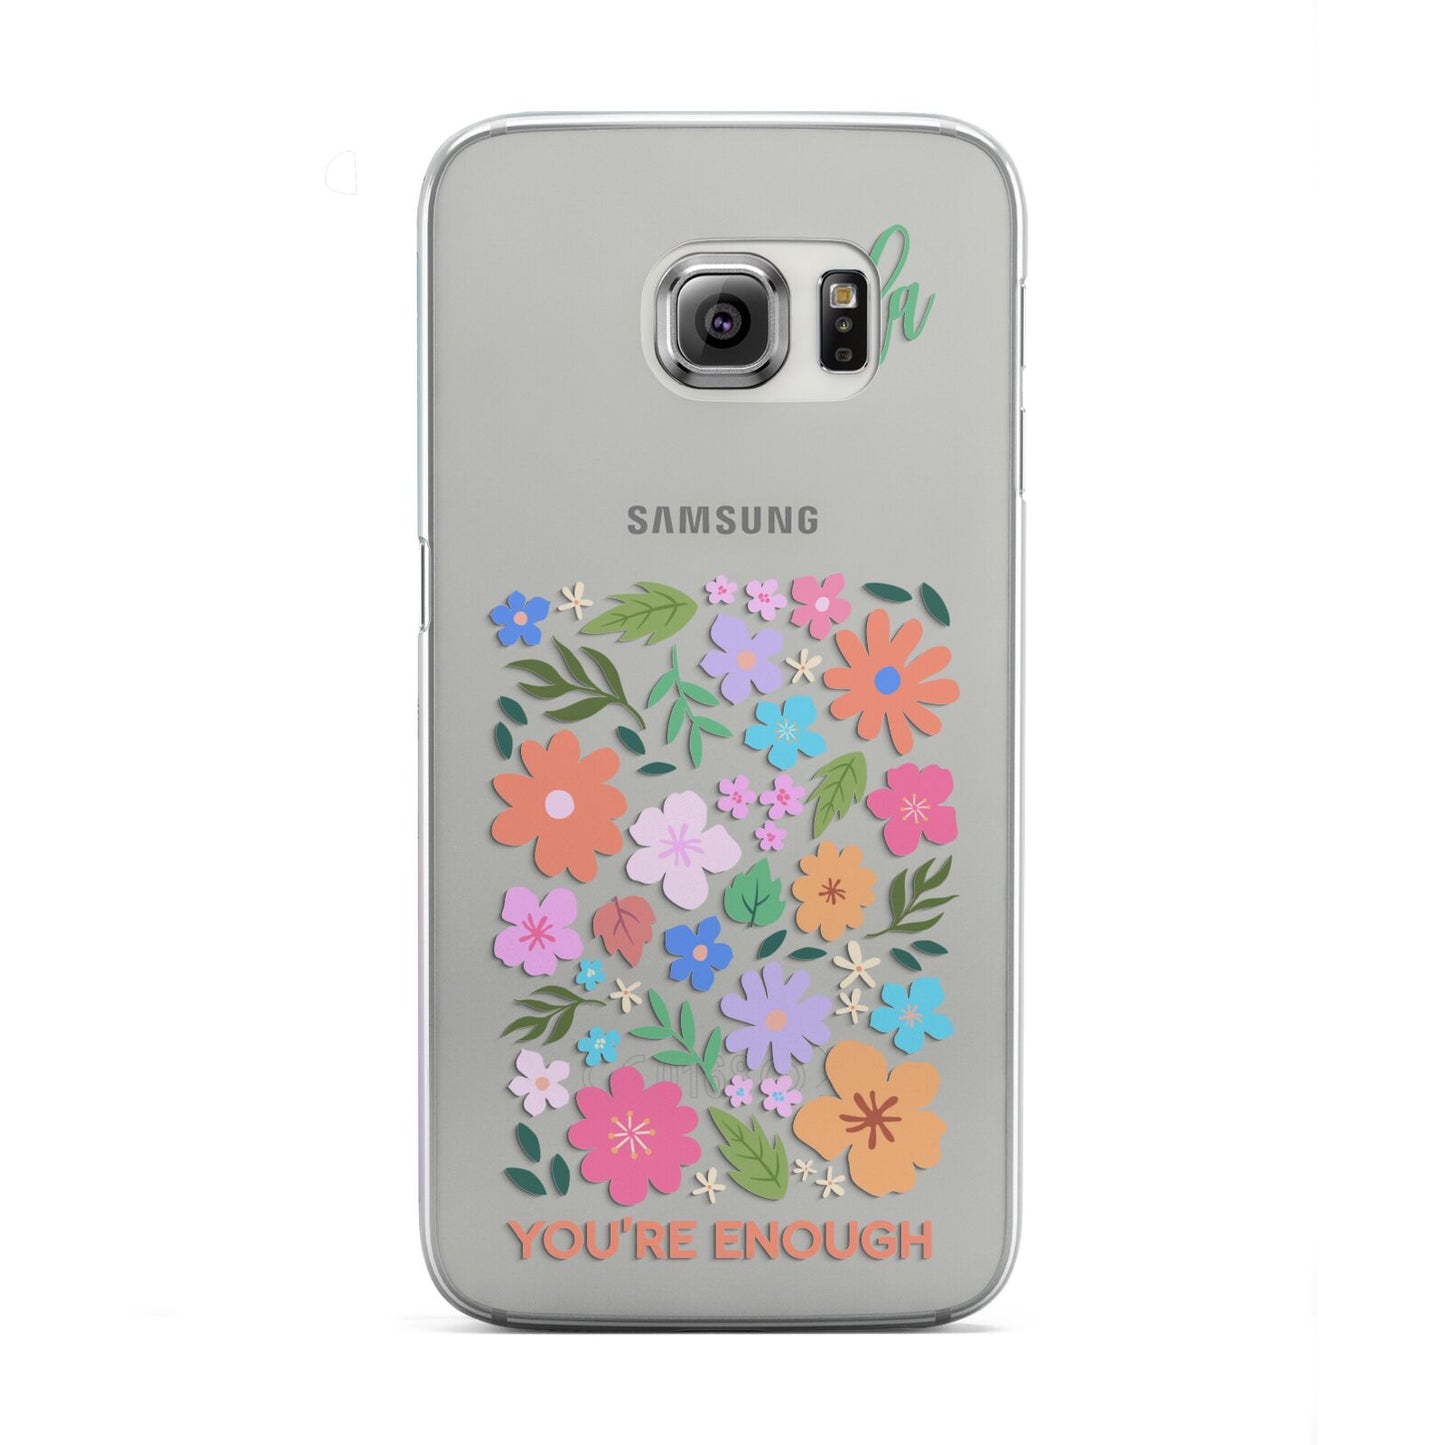 Floral Poster Samsung Galaxy S6 Edge Case